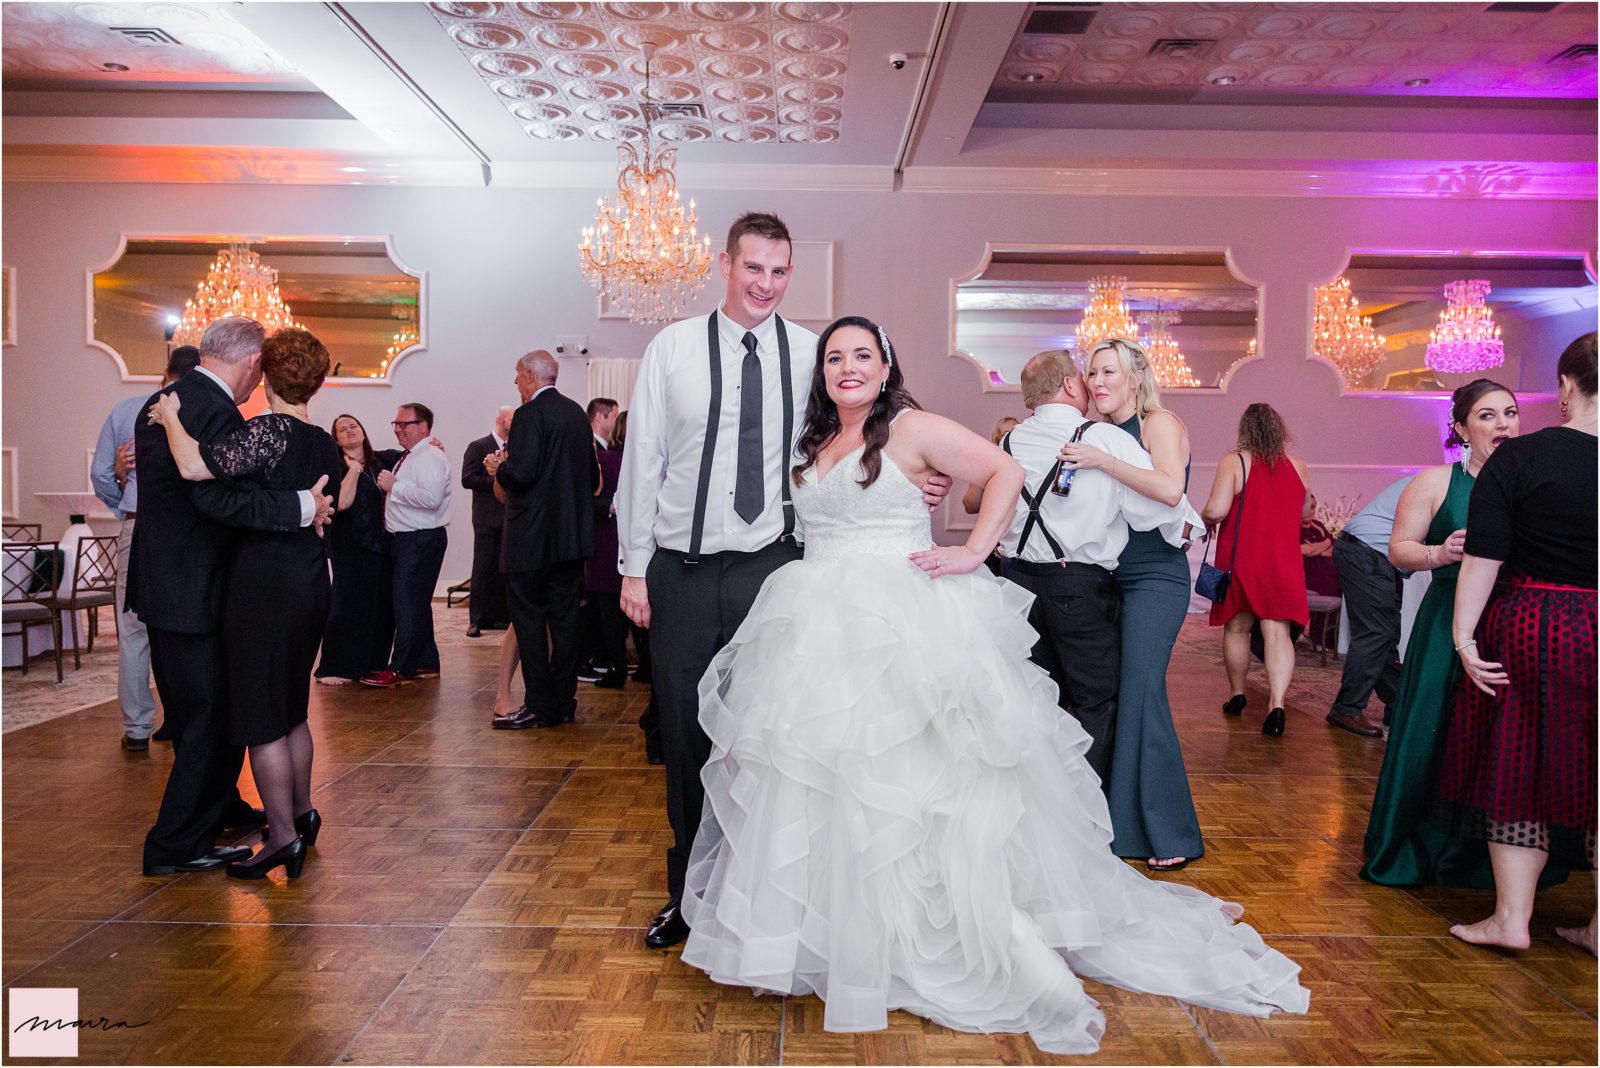 Oakbrook wedding in Drury Lane ,Venue, Reception Hall, Bride and Groom, guests family and friends dancing dance floor party dj